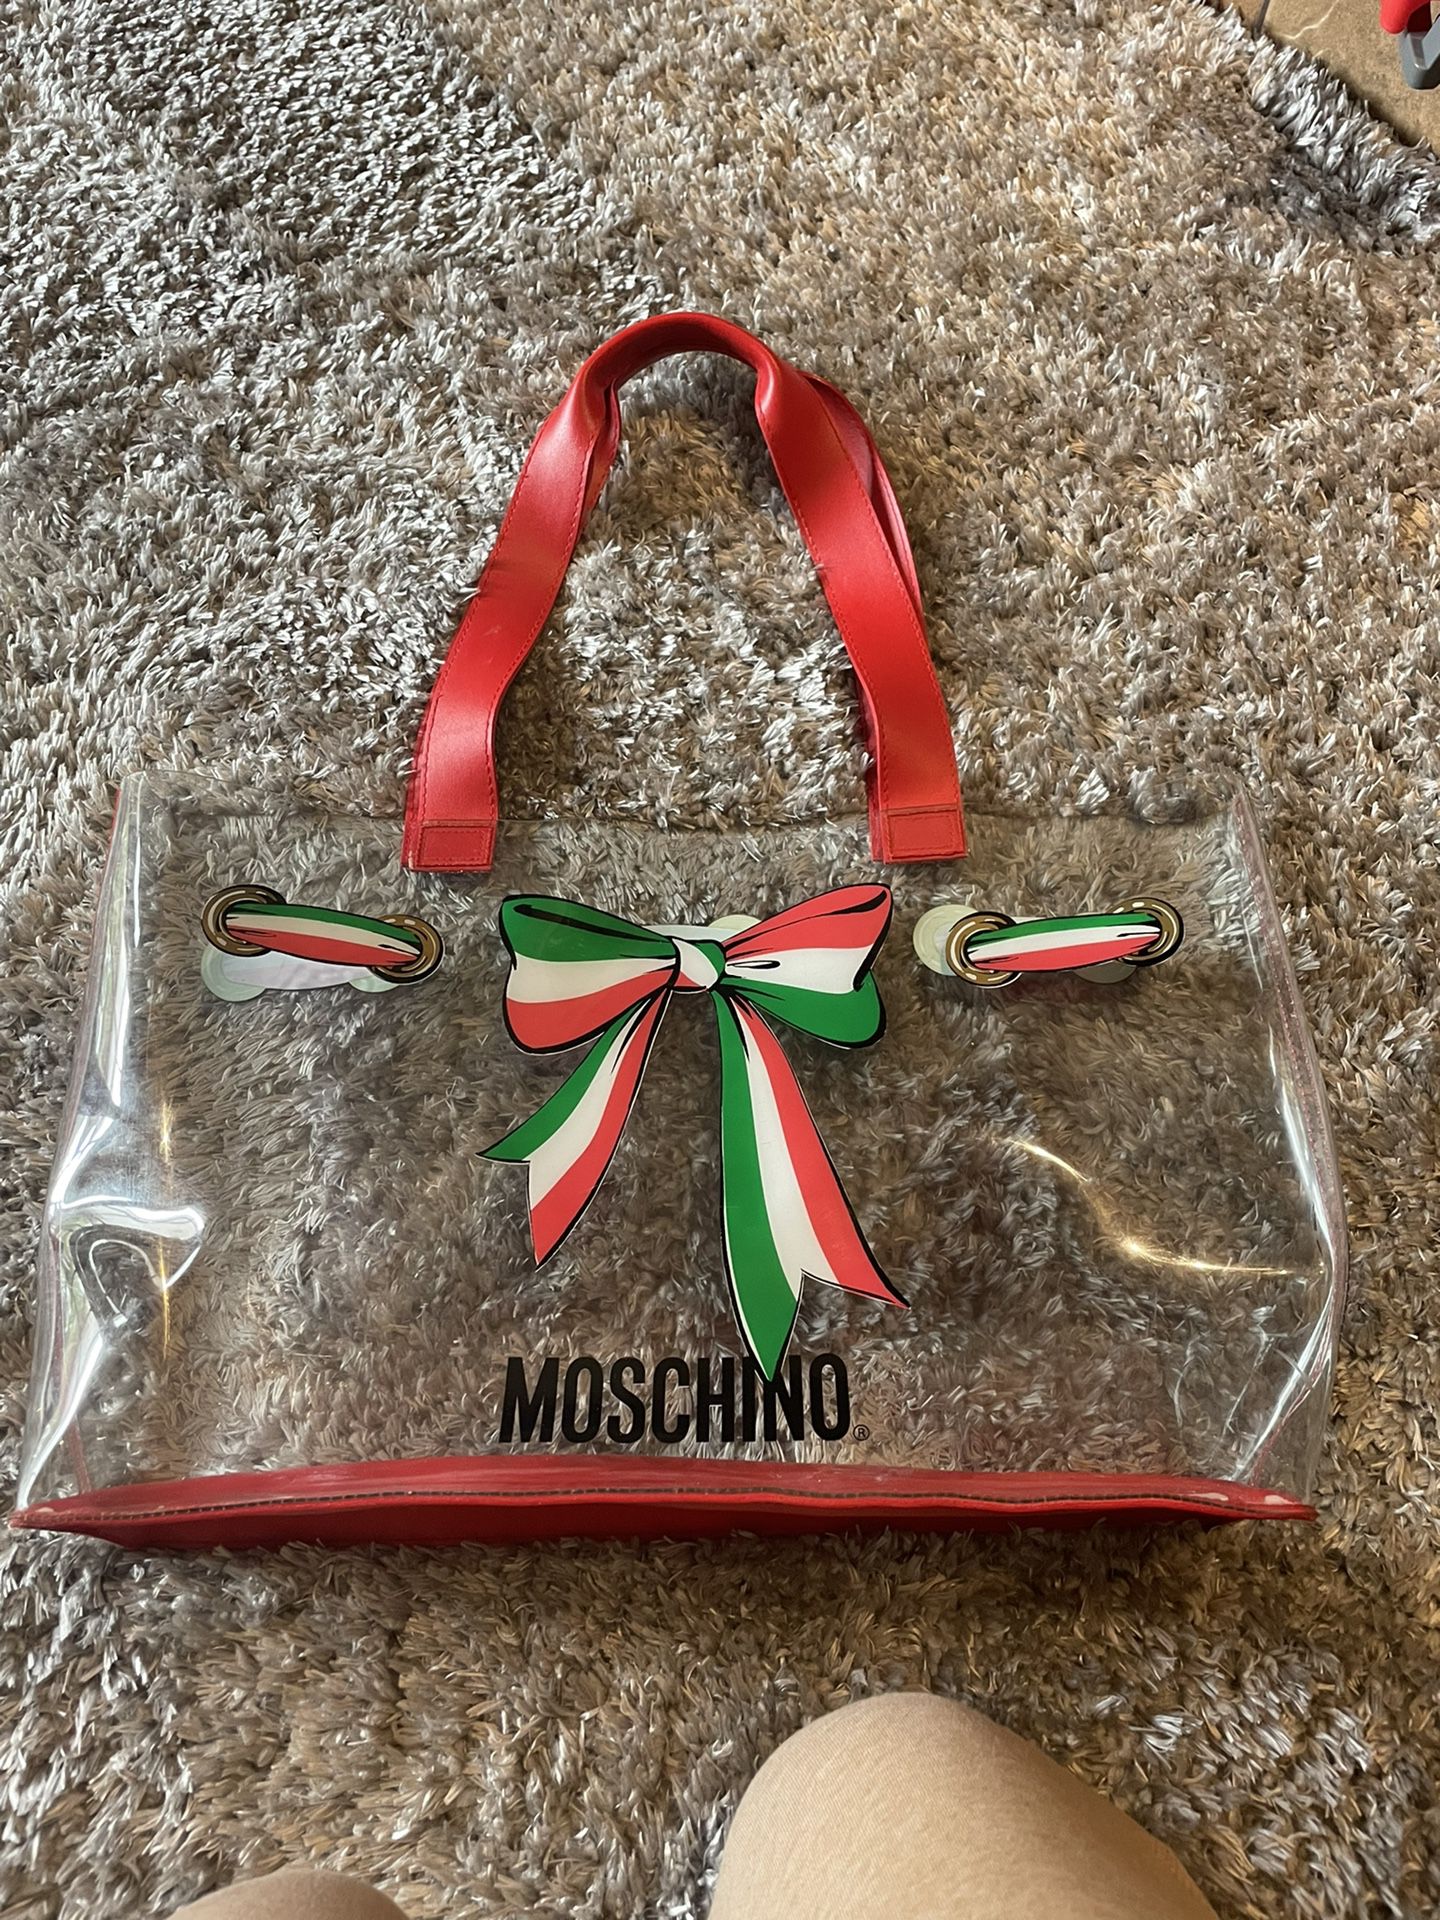 Vintage 1990s Moschino Italian Clear Tote Bag